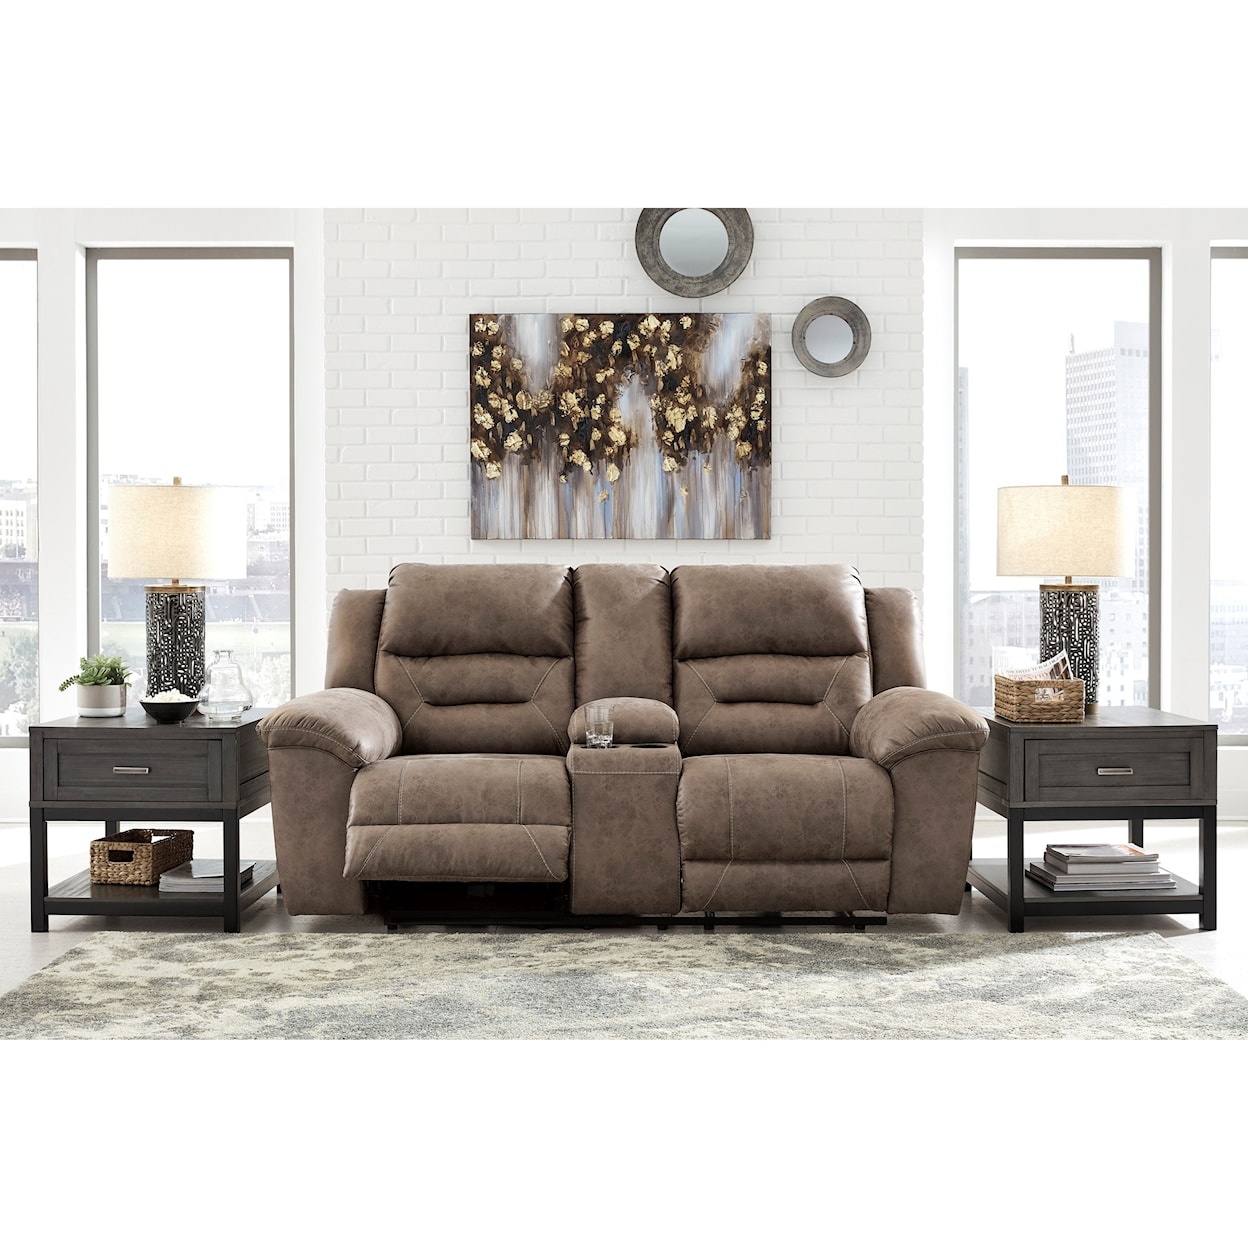 Signature Design by Ashley Stoneland Double Reclining Power Loveseat w/ Console